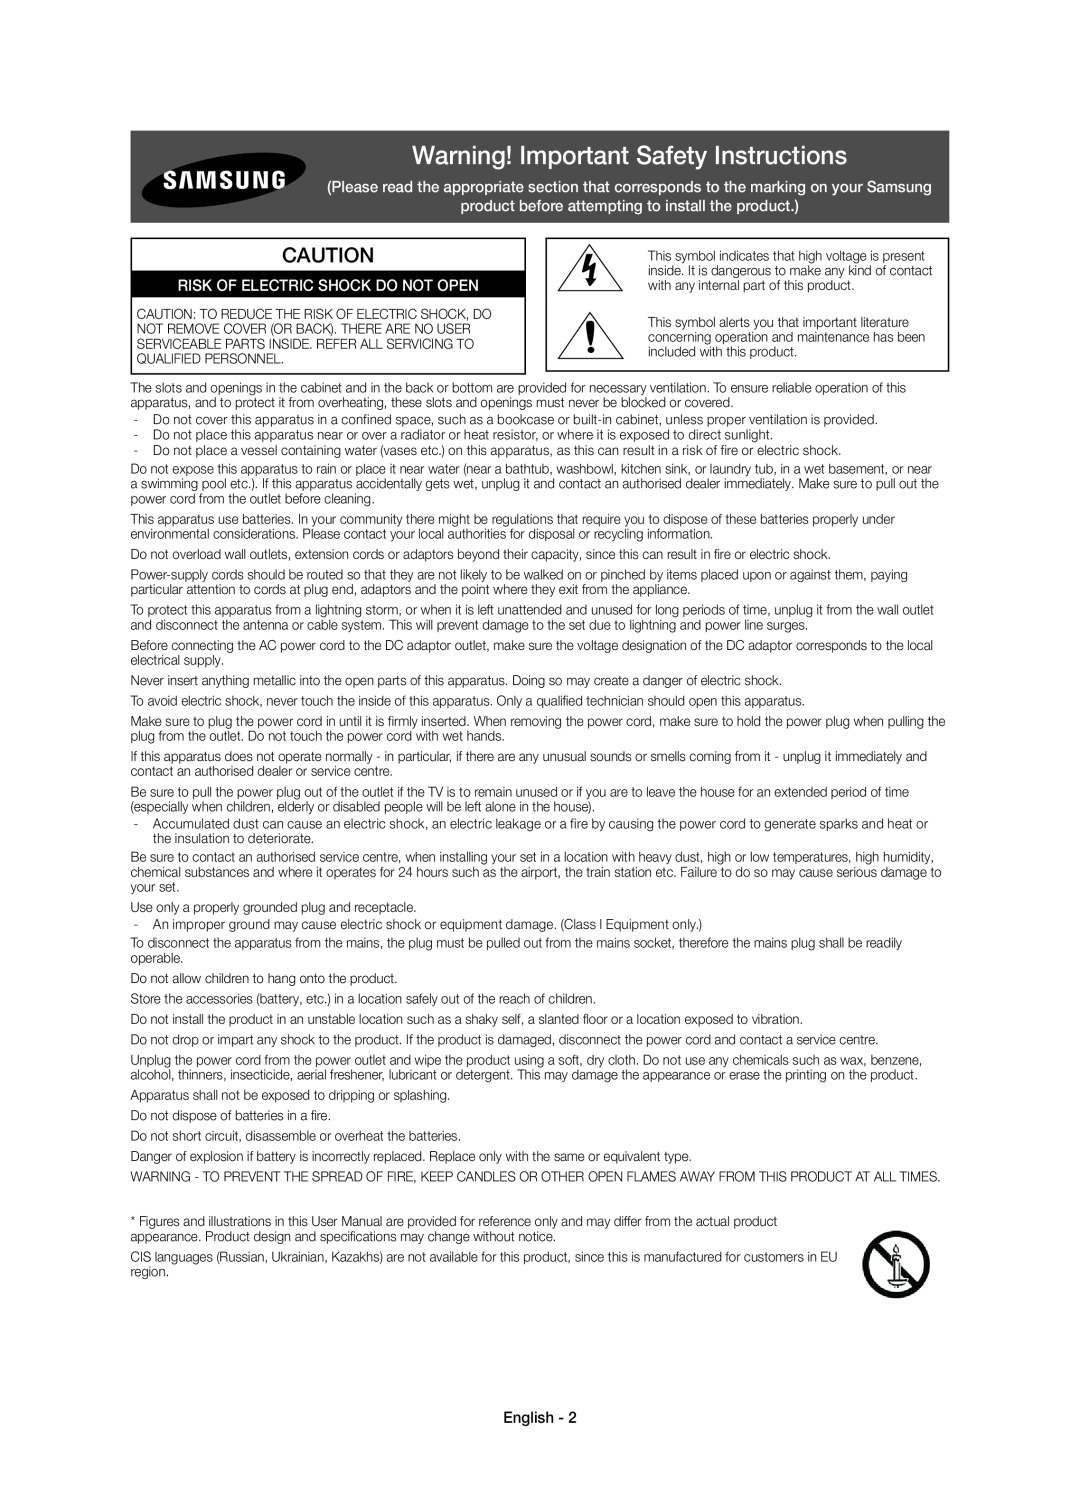 Samsung UE55H6750SVXZG manual Warning! Important Safety Instructions, product before attempting to install the product 